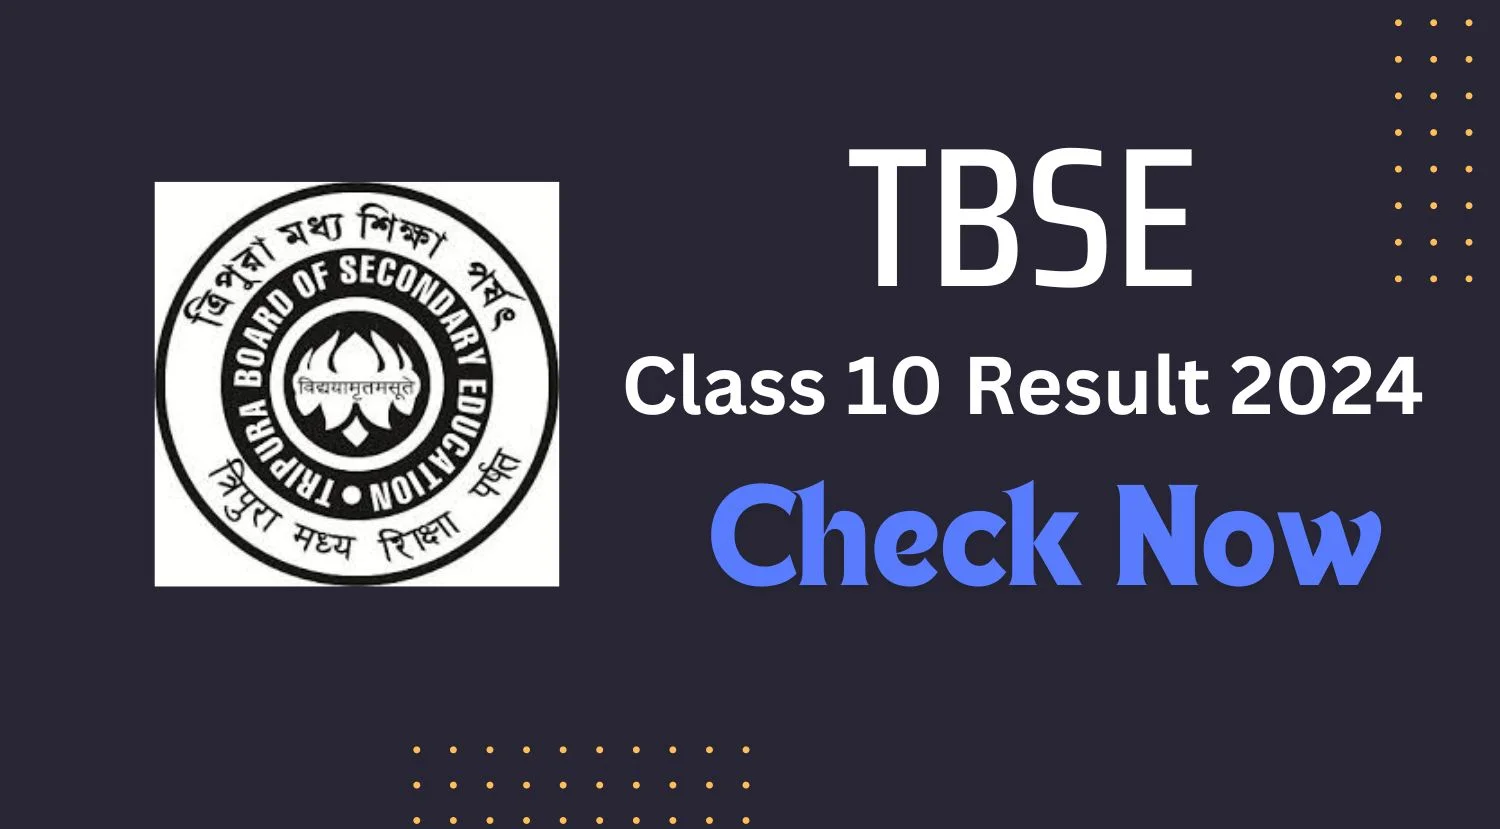 TBSE Class 10 Result 2024